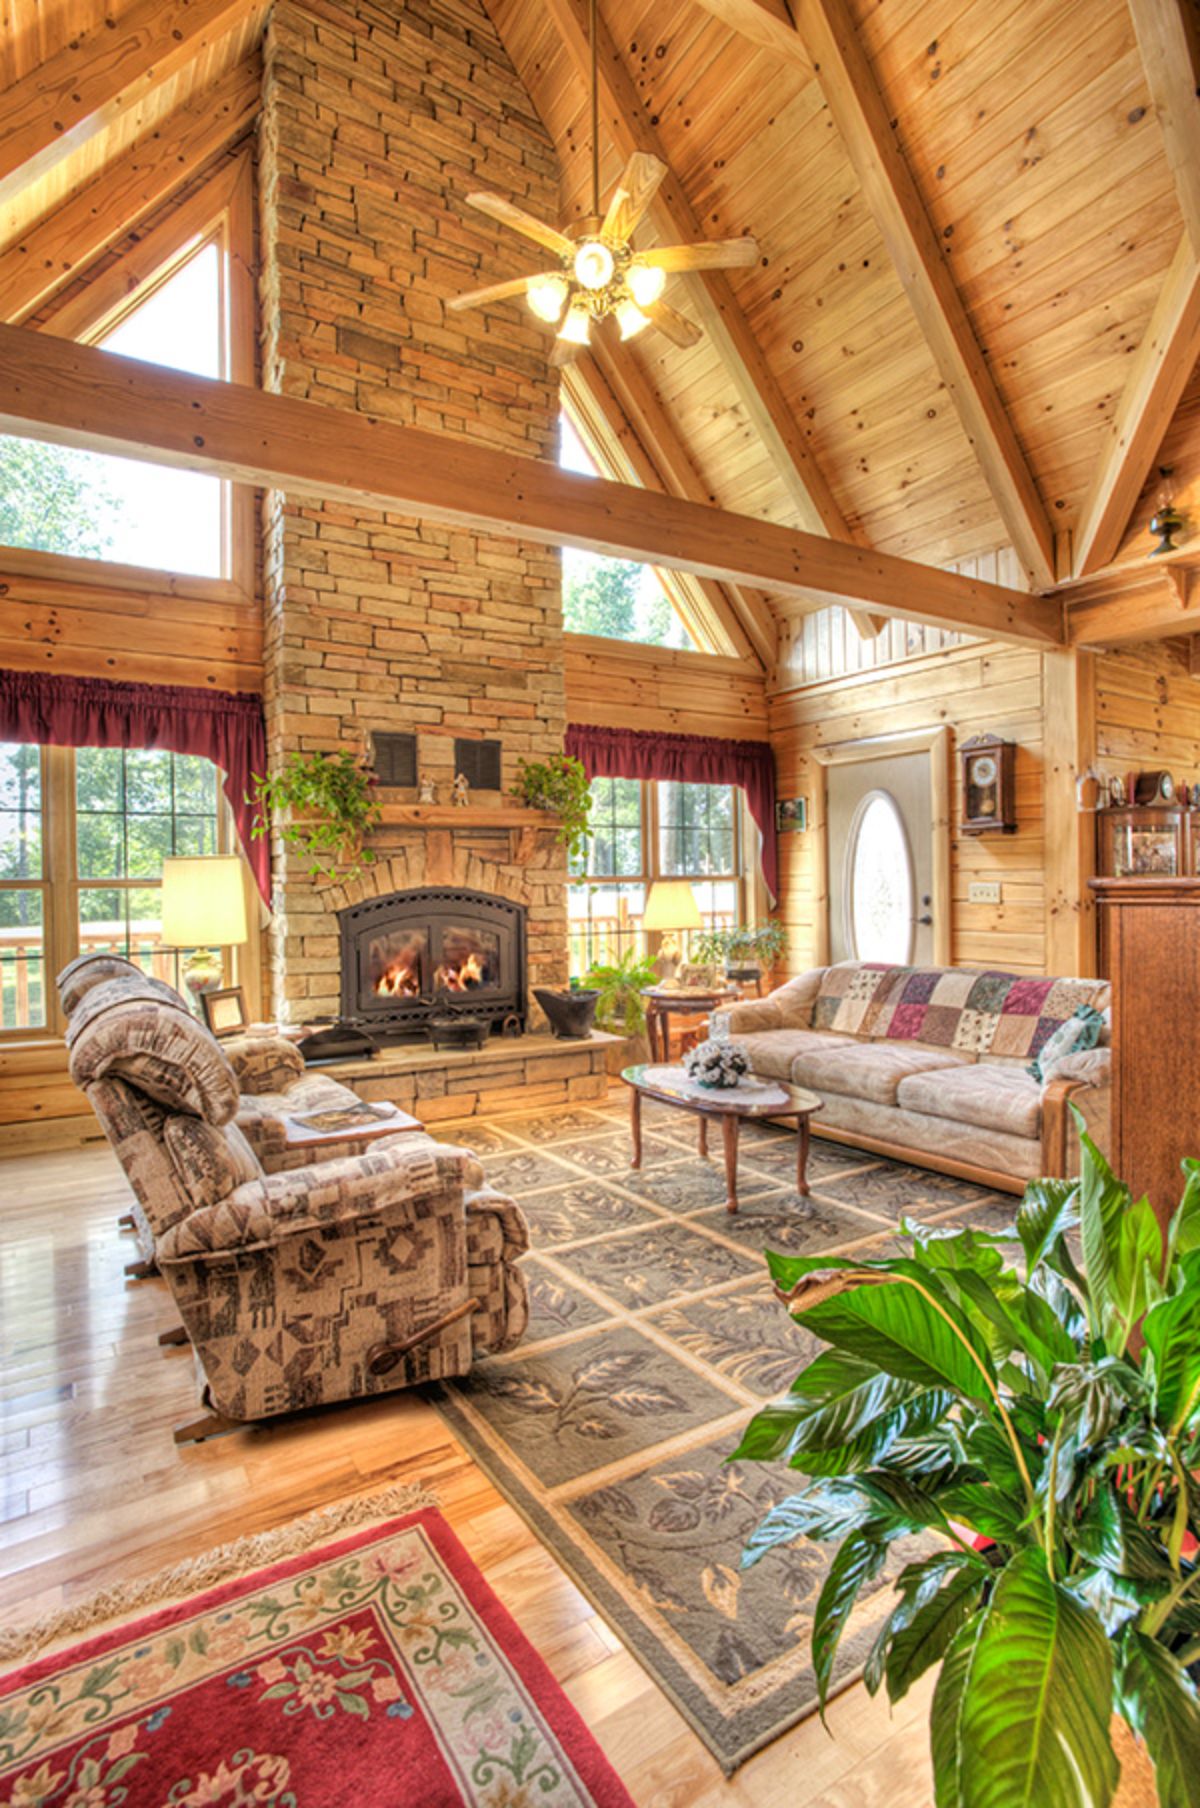 floral chair and sofa on rug in front of fireplace and wall of windows in log cabin